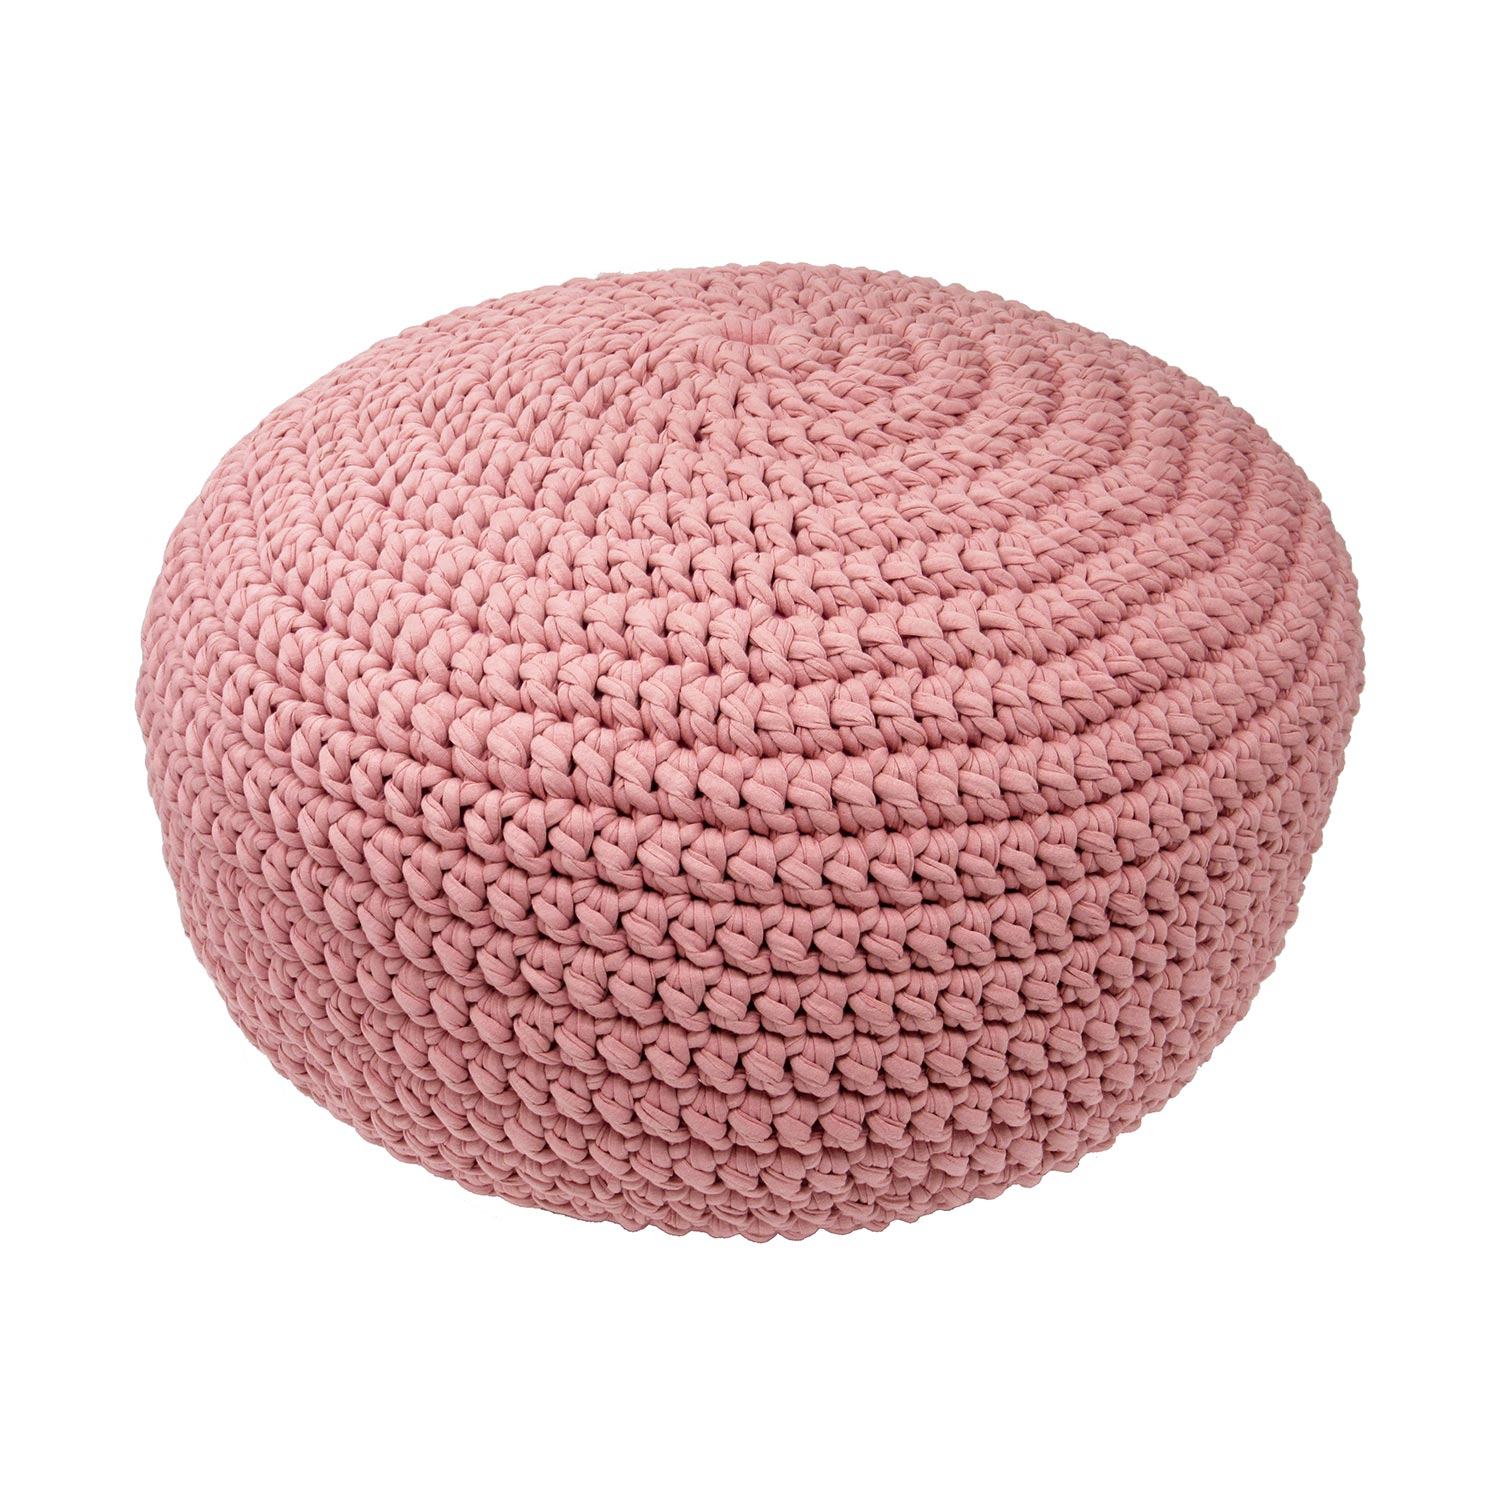 Made by Artisans Dusty Pink Cotton Crochet Floor Pebble Ottomans & Floor Pebbles Made by Artisans 